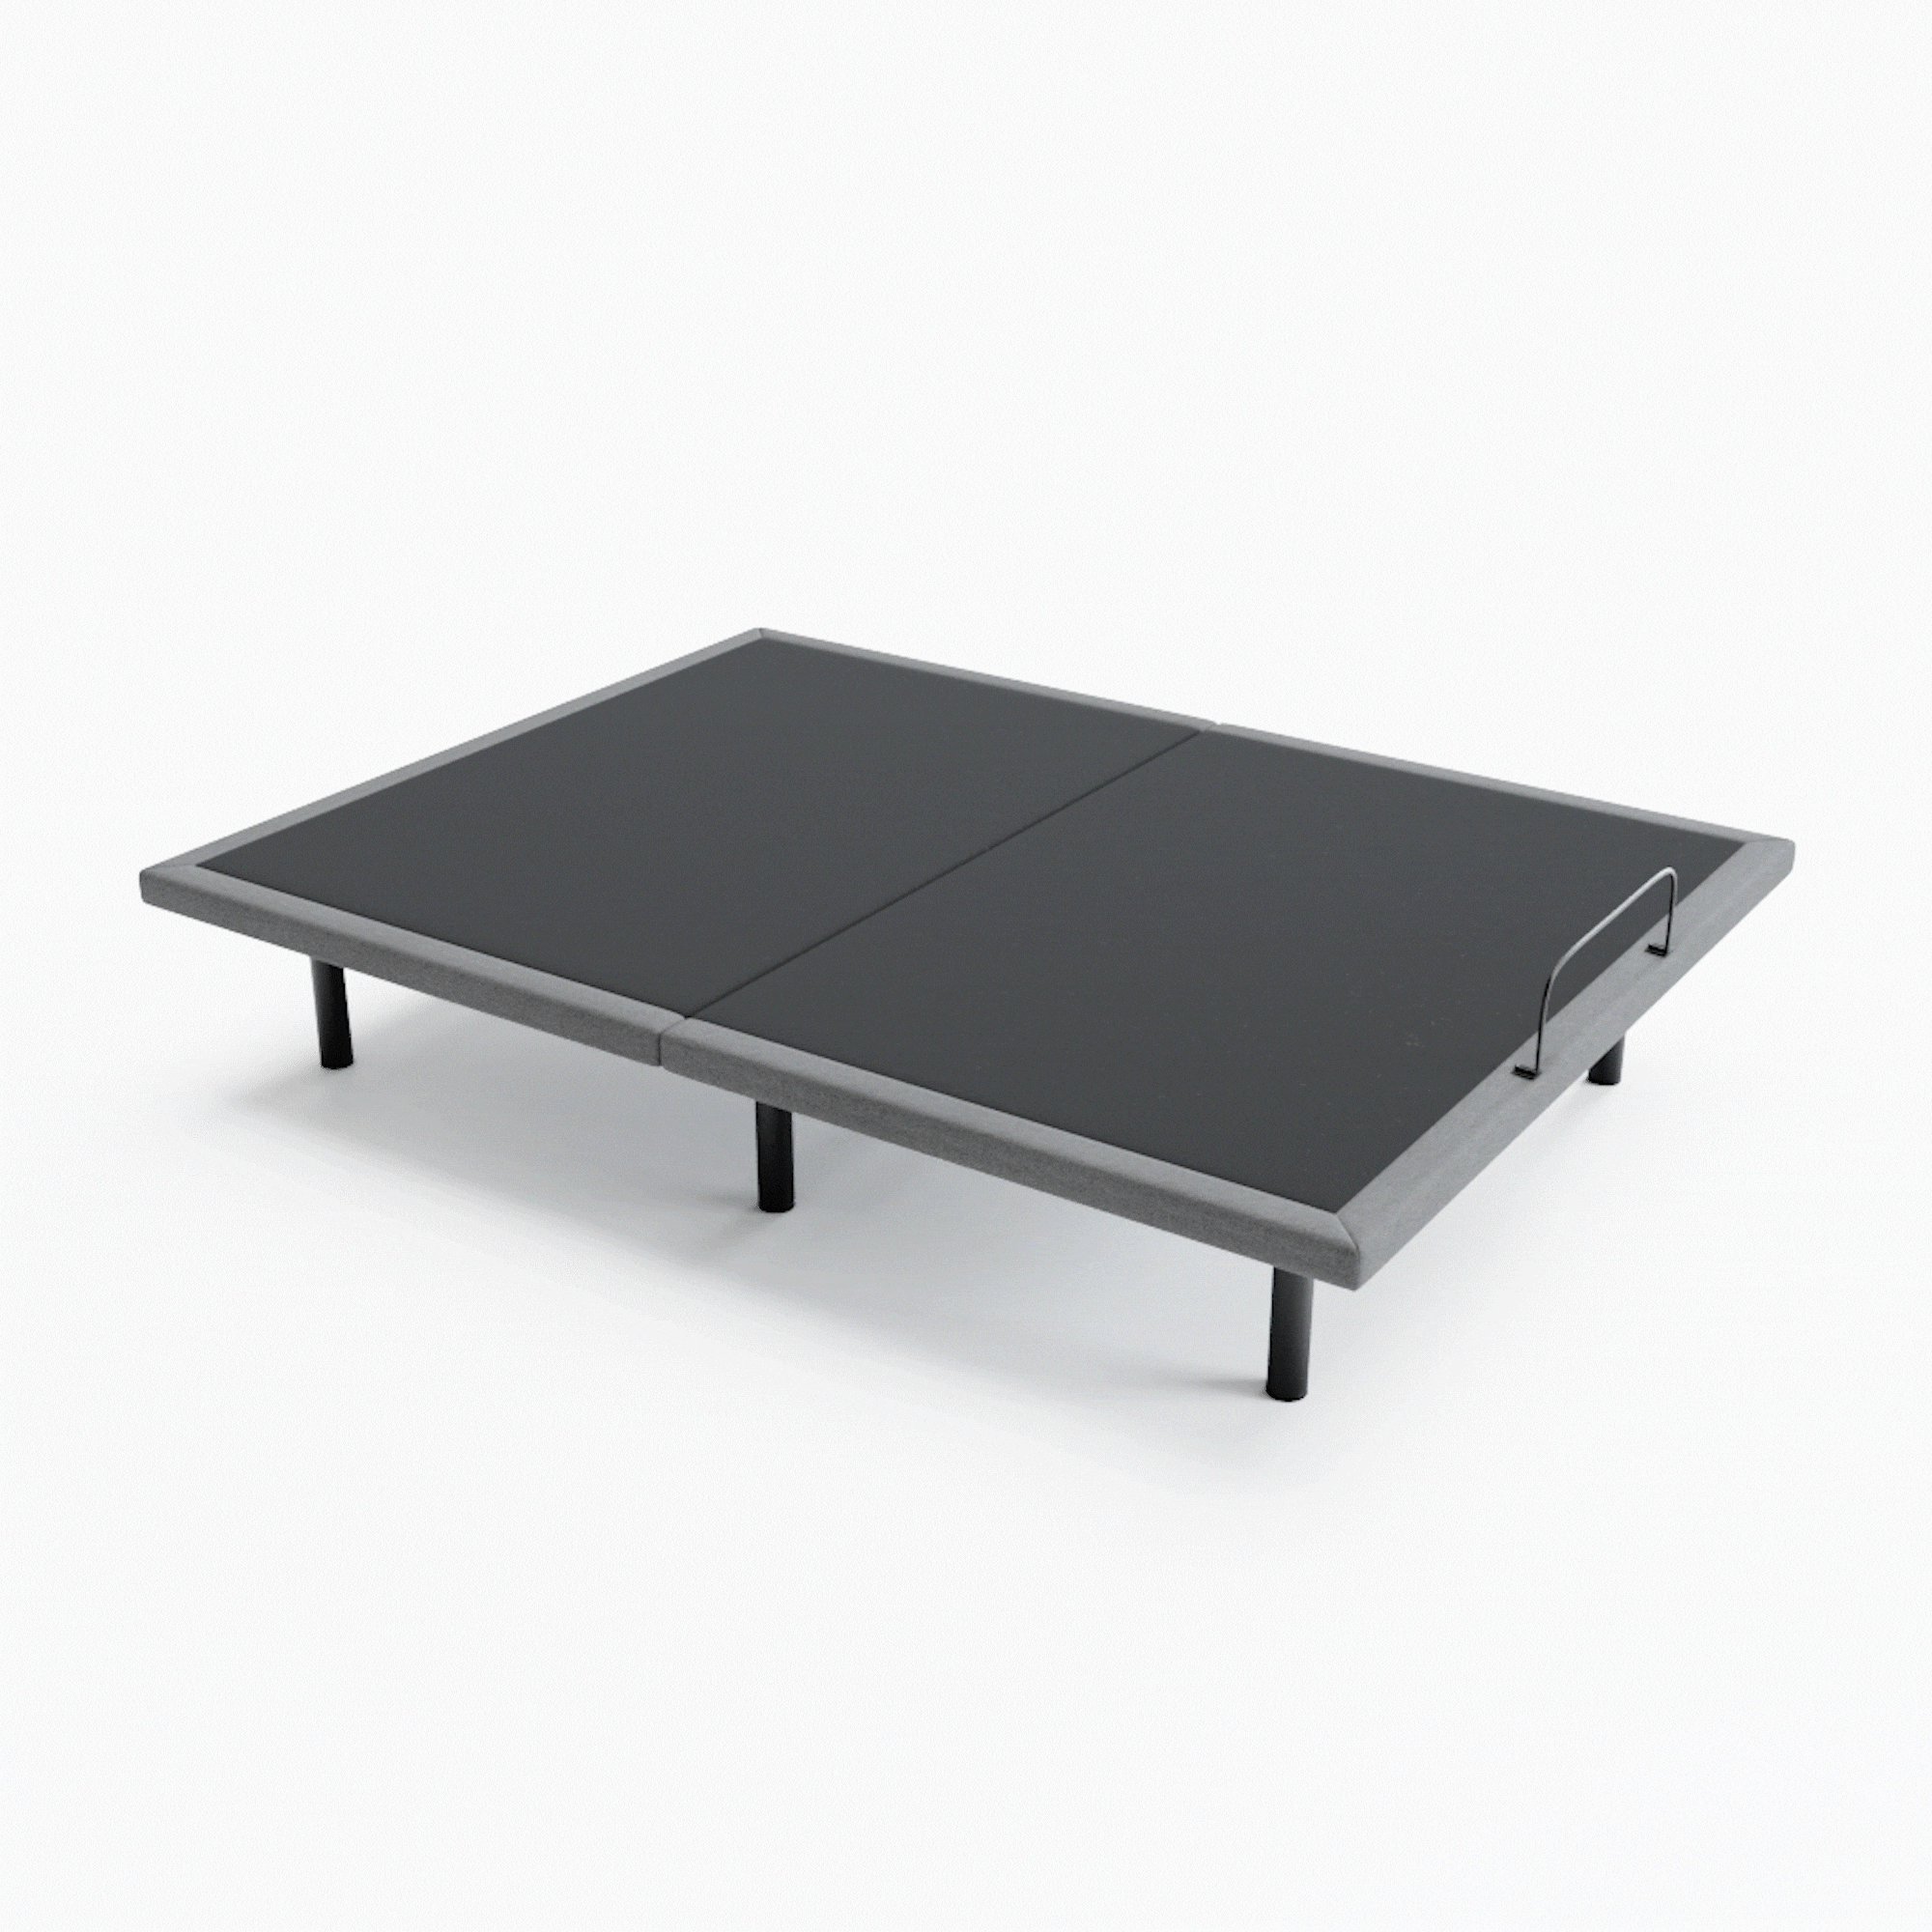 Lucid Advanced Power Adjustable Bed, Can You Raise An Adjustable Bed